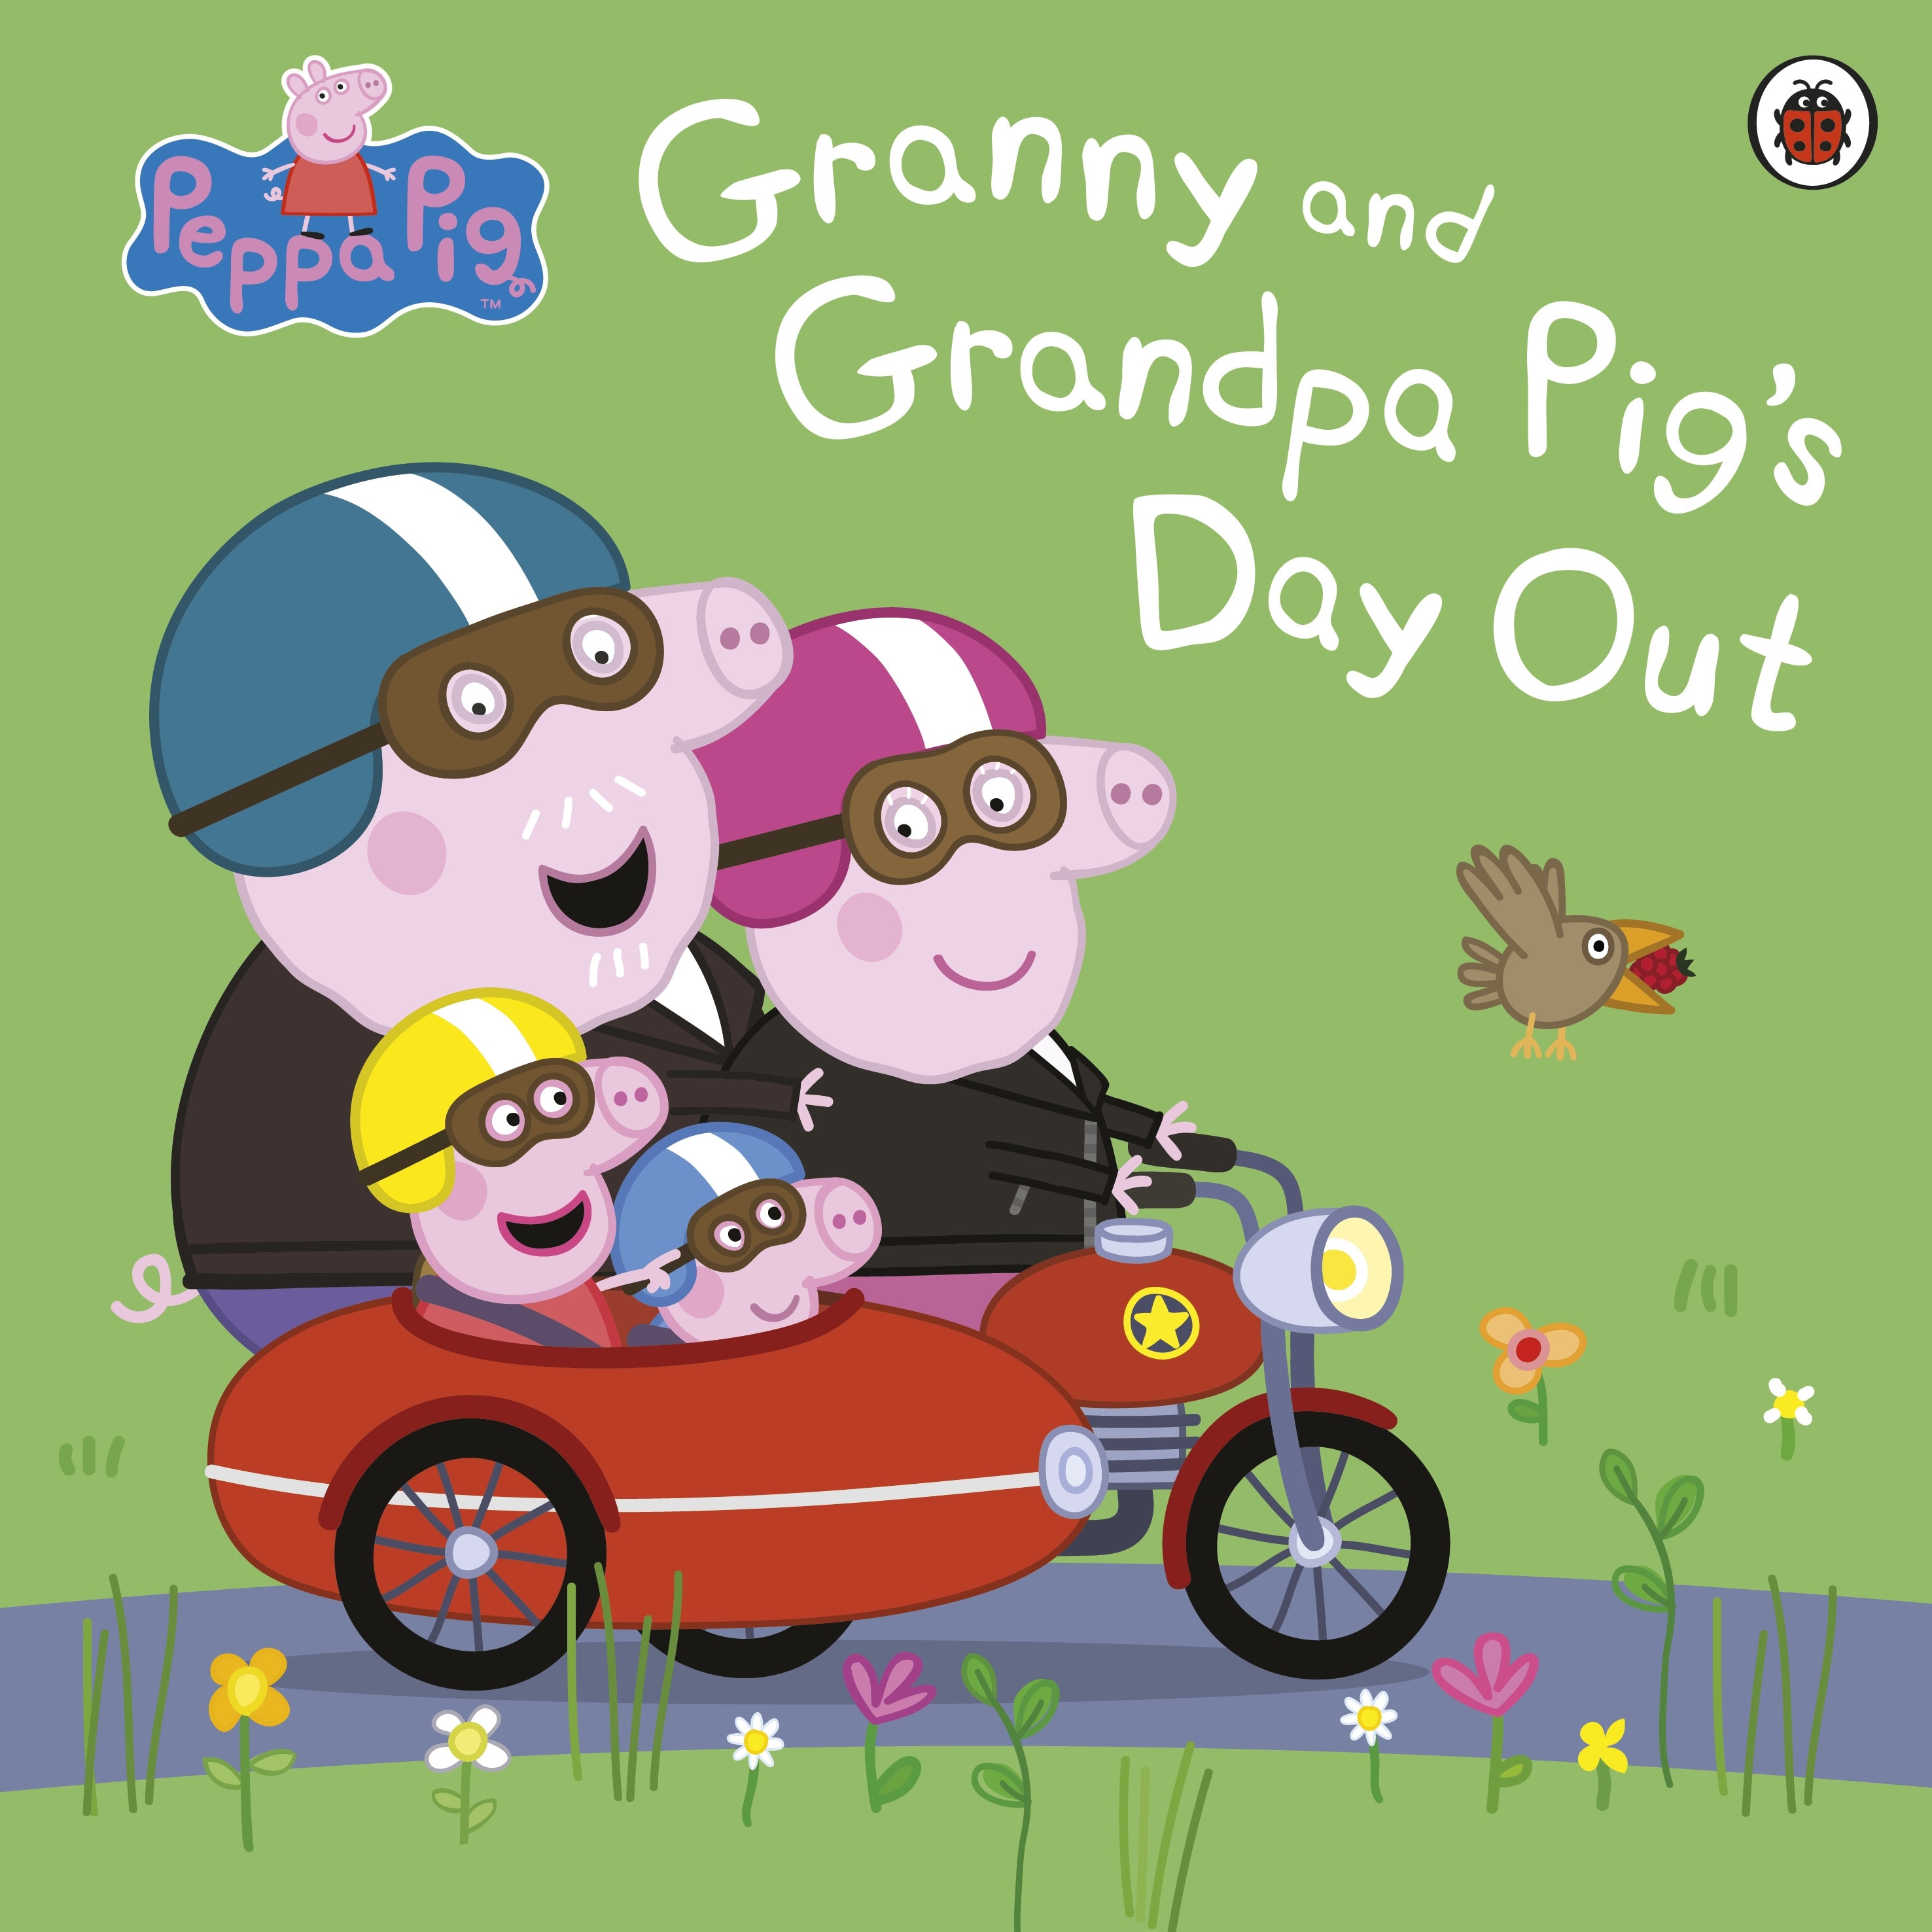 Book “Peppa Pig: Granny and Grandpa Pig's Day Out” by Peppa Pig — May 26, 2022